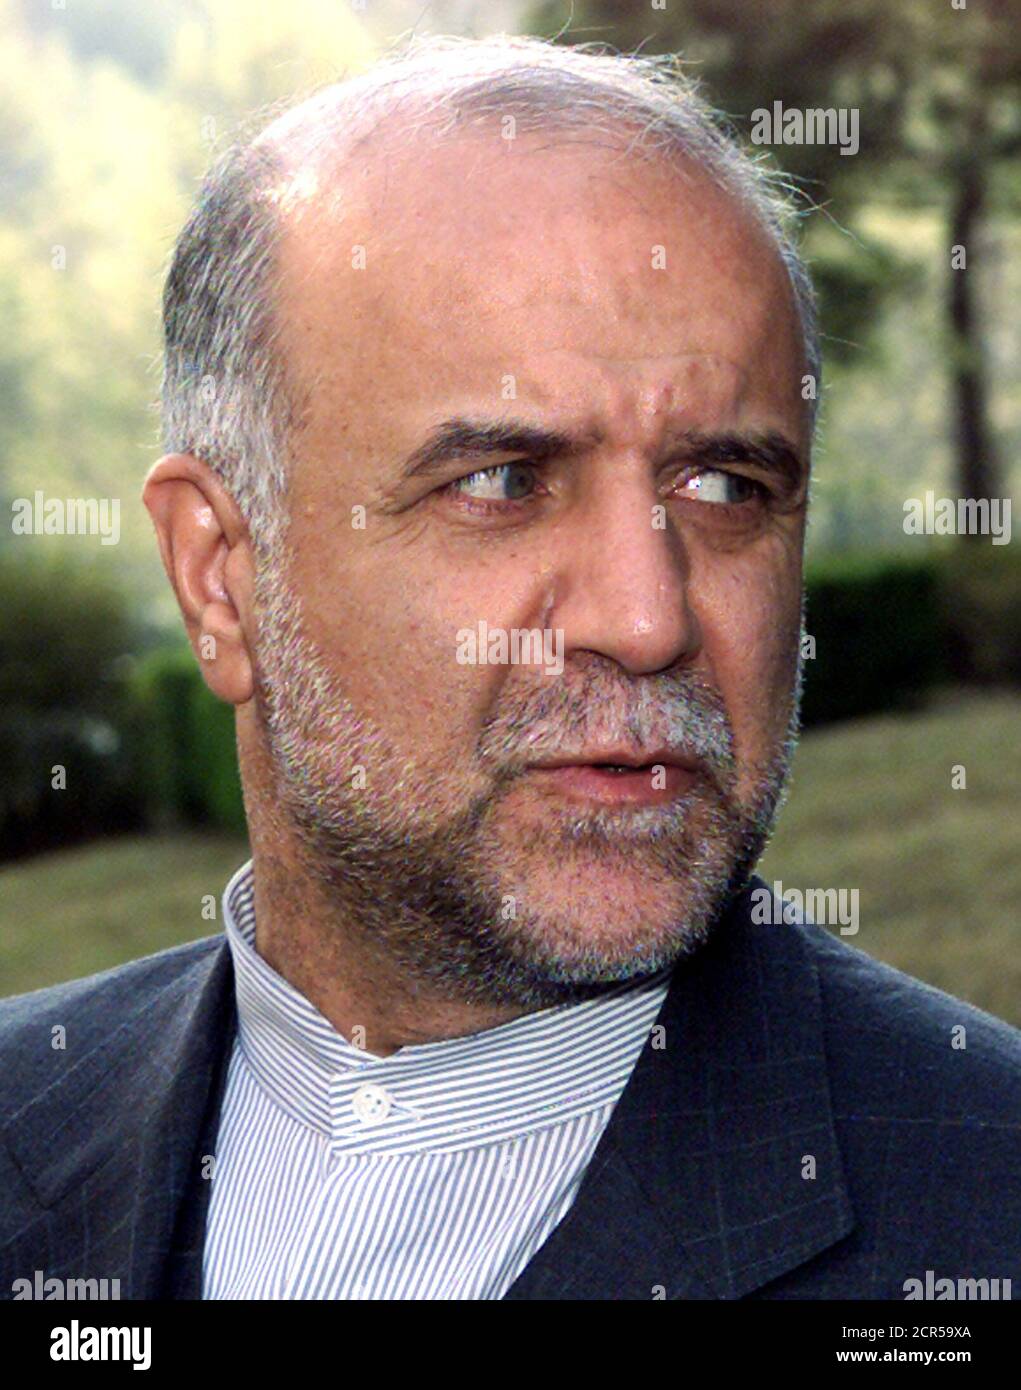 Iran's Oil Minister Bijan Zanganeh visits the South Korean Ministry of Commerce, Industry and Energy in Seoul April 10, 2002. Zanganeh said on Wednesday his country would join Iraq's decision to suspend oil exports if other Islamic states did so. Baghdad took the decision to protest against Israeli incursions into Palestinian areas. REUTERS/Lee Jae-Won  LJW/RCS Stock Photo